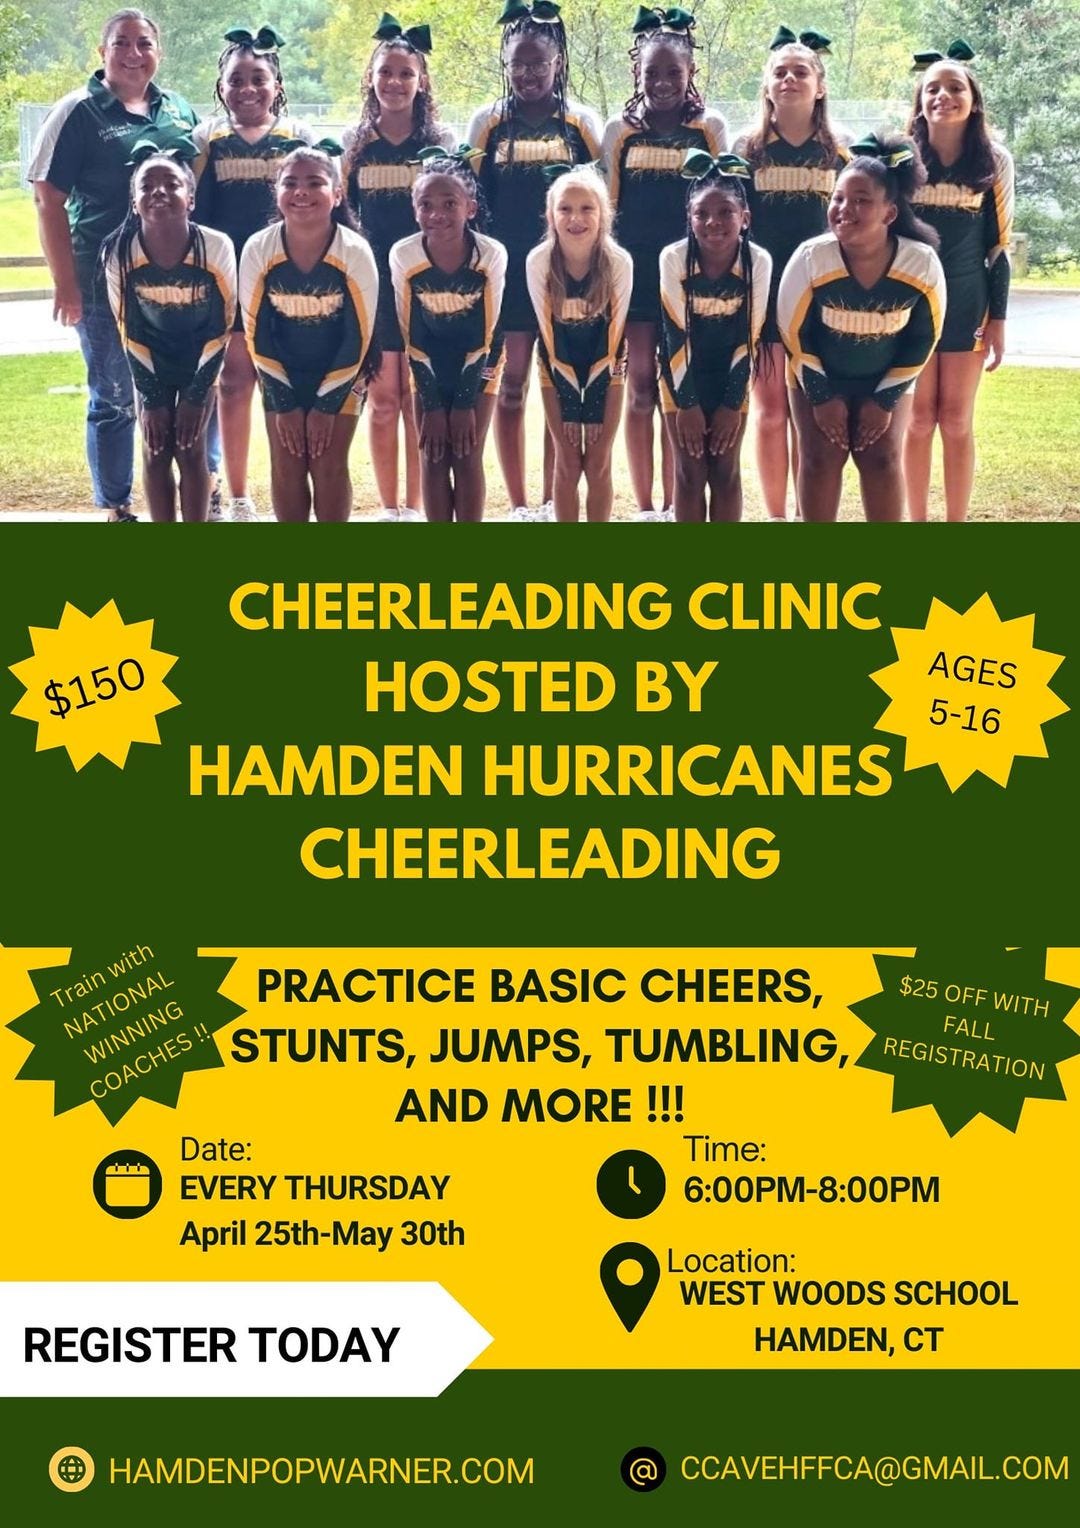 May be an image of 9 people and text that says 'AAoAApH лOnbl KKTOB CHEERLEADING CLINIC $150 HOSTED BY HAMDEN HURRICANES CHEERLEADING AGES 5-16 with Train NATONAL TrainONA NATIONAL PRACTICE BASIC CHEERS, WINNING WINNING COACHES COACHES STUNTS, JUMPS, TUMBLING, AND MORE !!! Time: 6:00PM-8:00PM ஸ்டம் $25 $25OFFWITH OFF WITH FALL REGISTRATION Date: EVERY THURSDAY April 25th-May 30th REGISTER TODAY Location: WEST WOODS SCHOOL HAMDEN, CT HAMDENPOPWARNER.COM CCAVEHFFCA@GMAIL.COM'